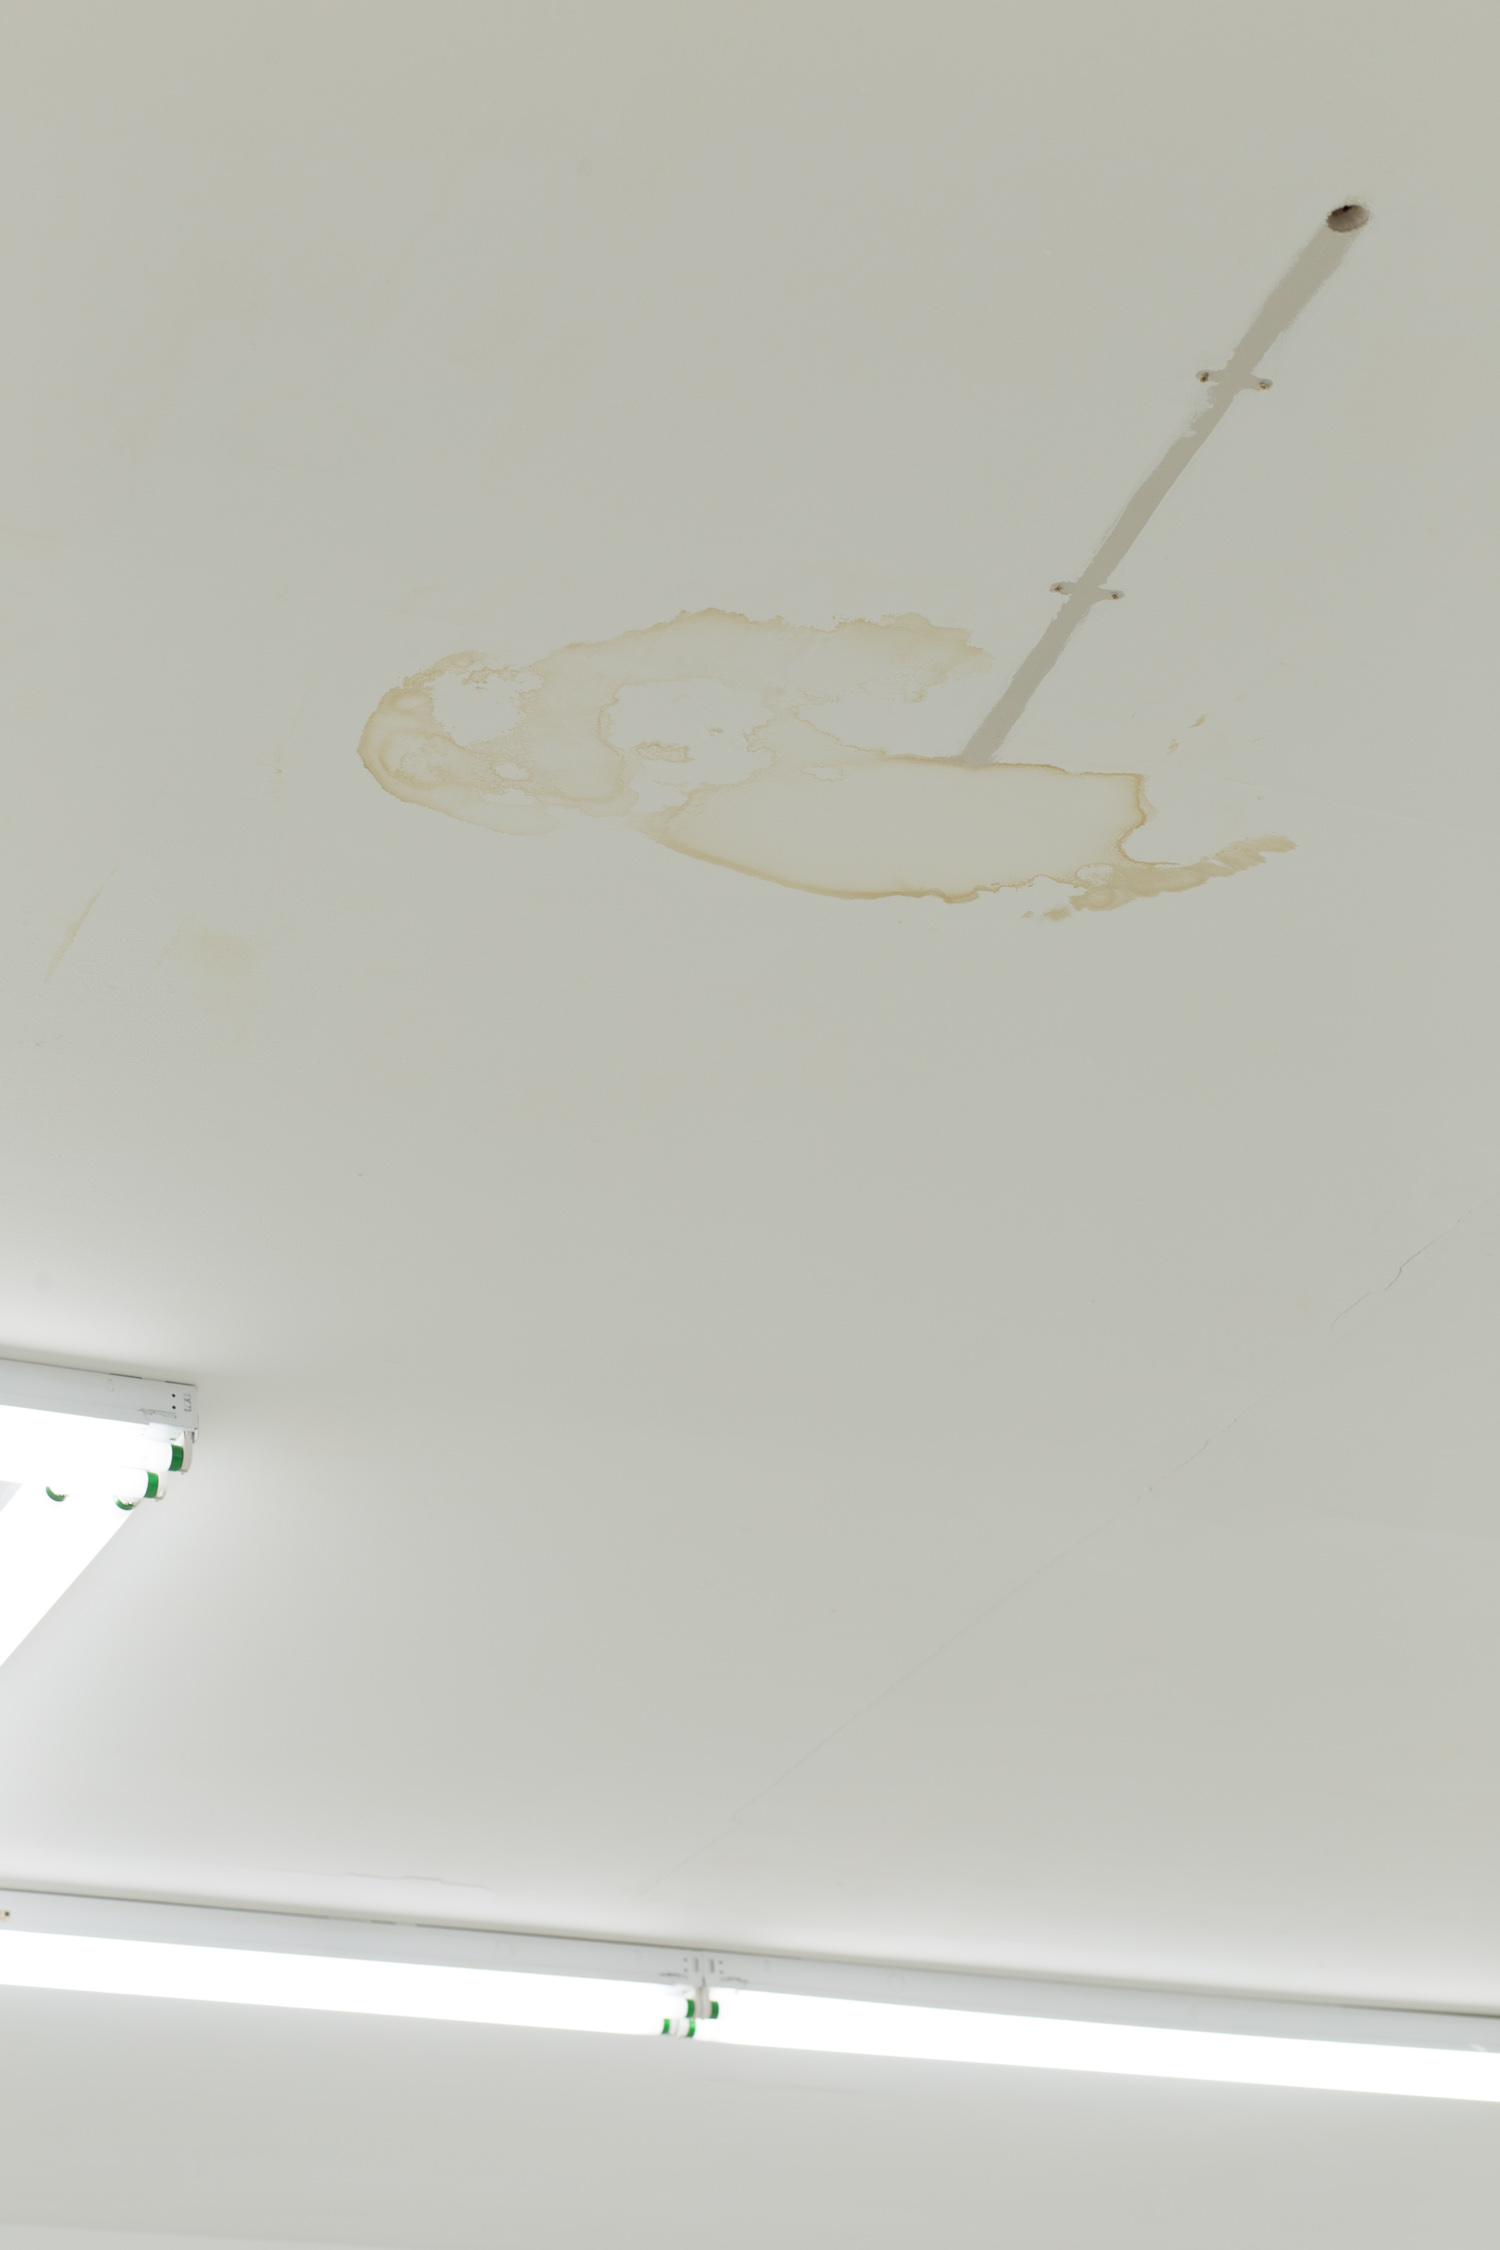 There is a brown water stain on the ceiling and the suggestion of a removed pipe.